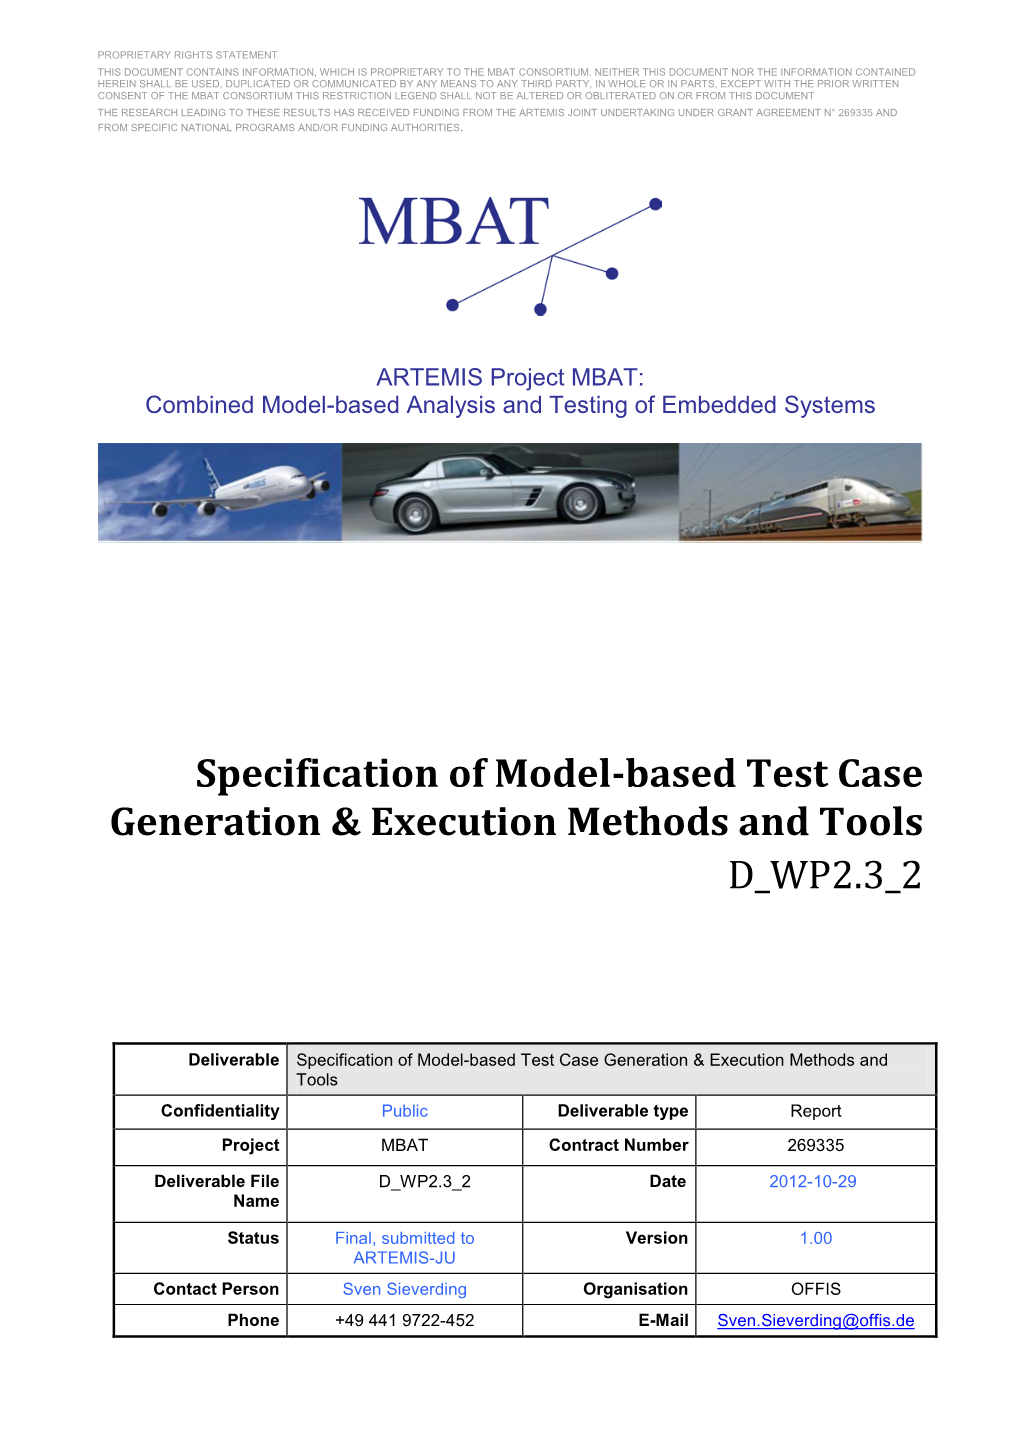 Specification of Model-Based Test Case Generation & Execution